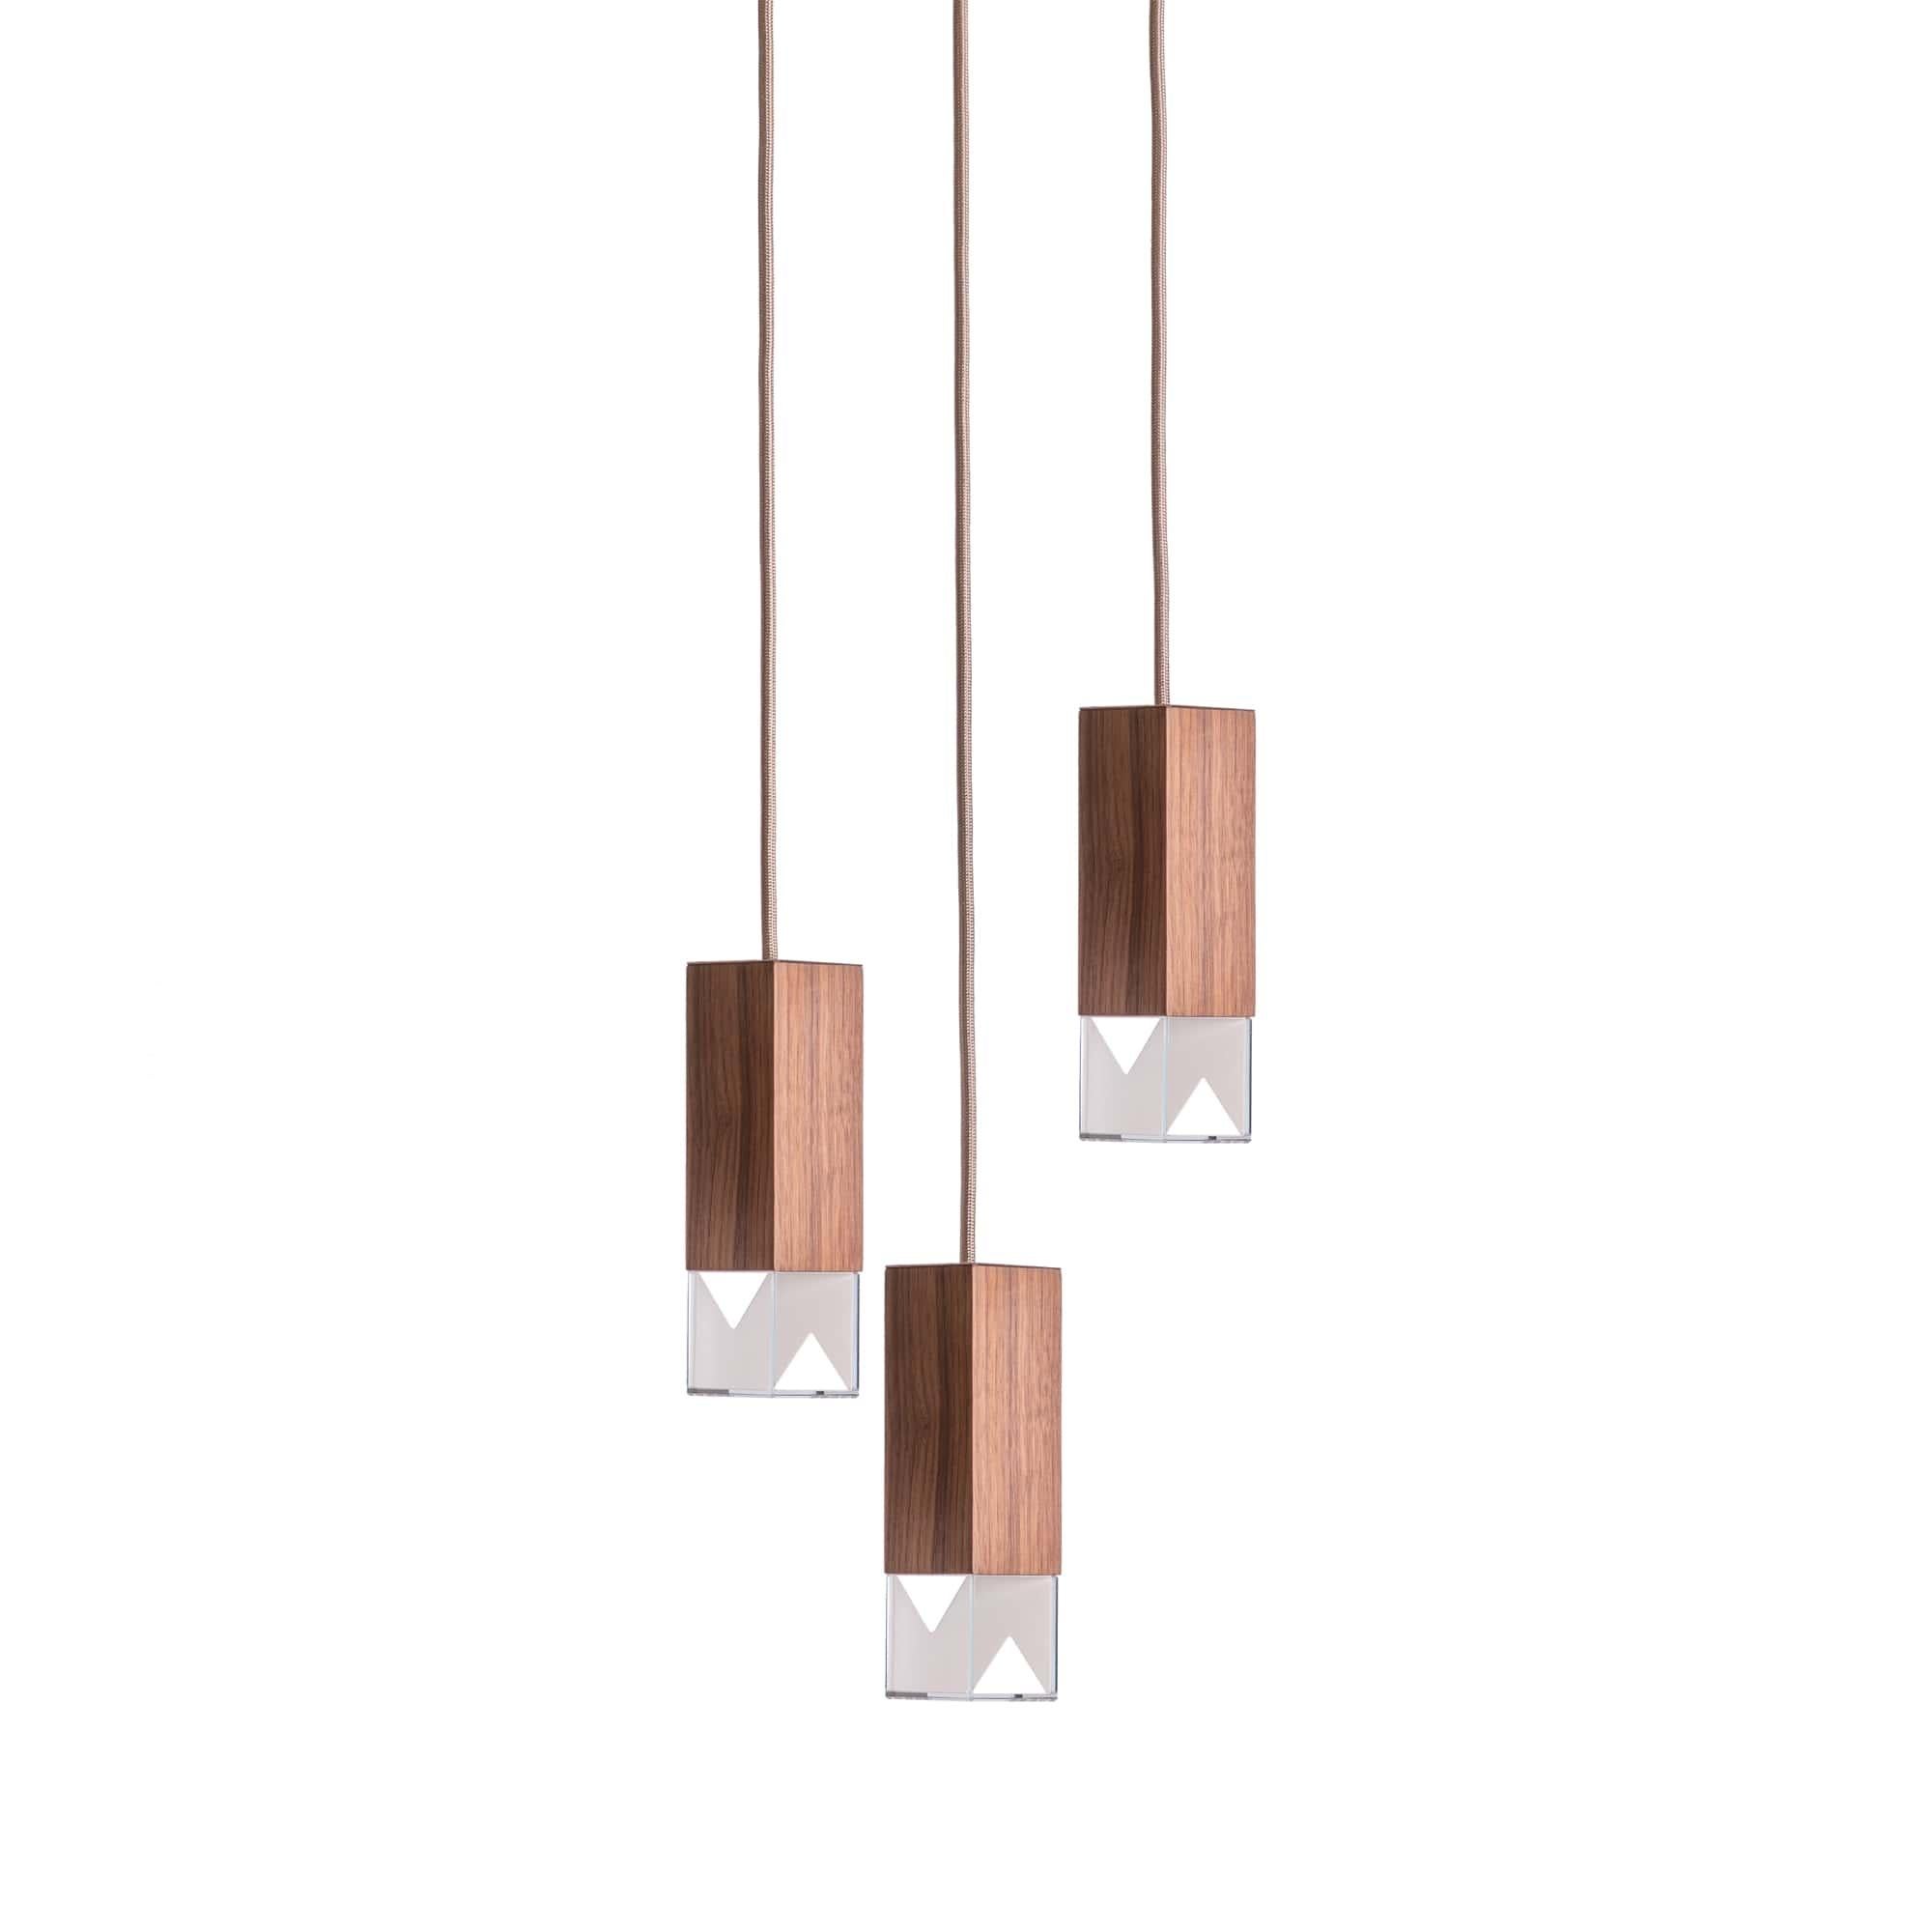 Wood trio chandelier in marble by Formaminima
Dimensions: 30 x 30 x H 68 cm
Materials: Lamp body in walnut solid wood

Light source supplied per lamp:
LED 1 x G9 max 2.6W, 50-60Hz G9 connection 
320lm 2700K Rc 80 EU Standard